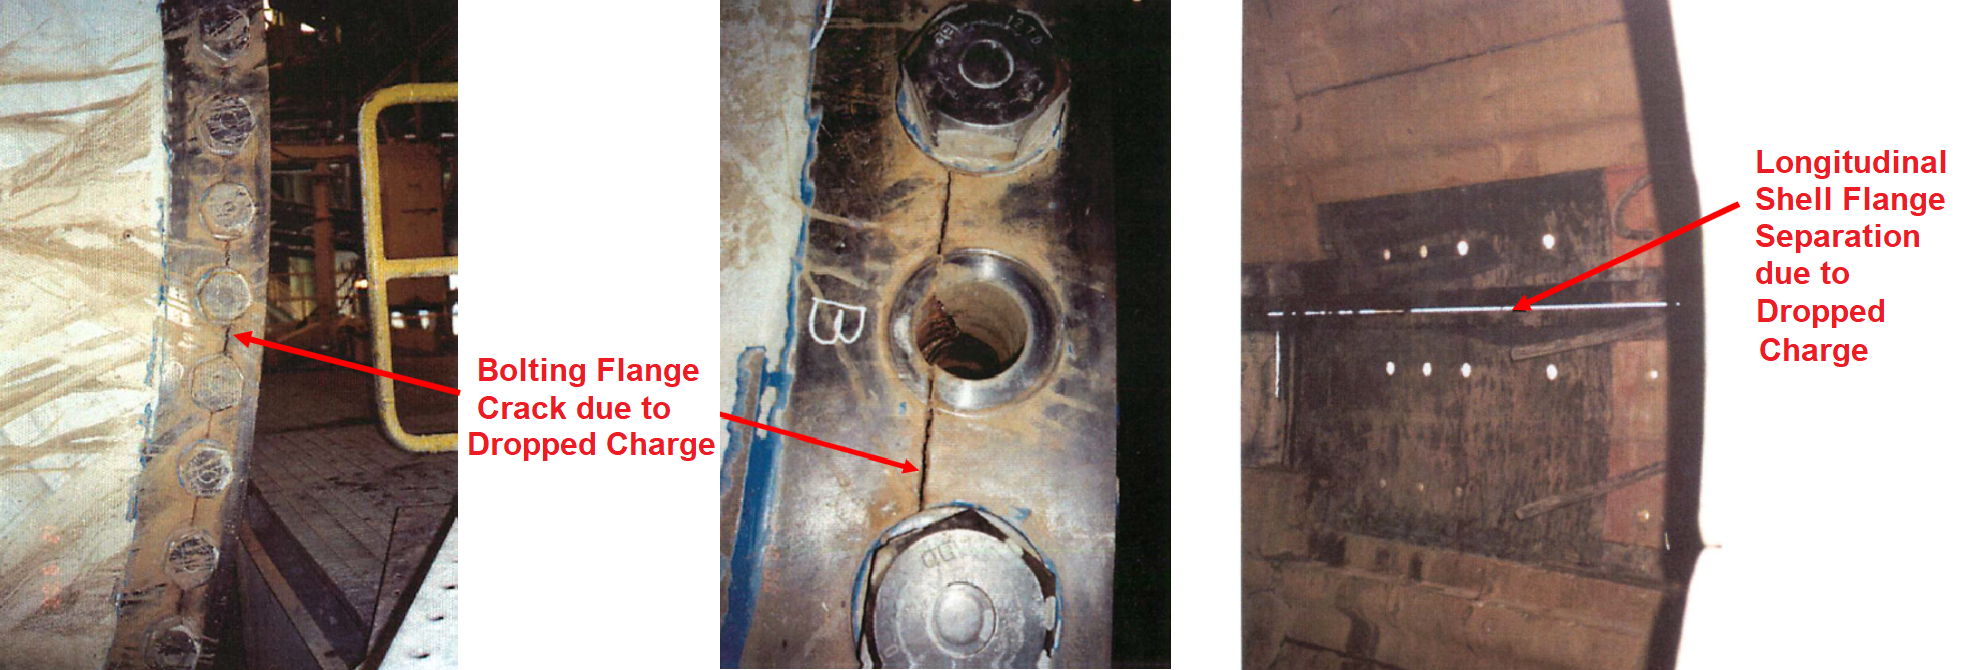 Showing cracks and separation in grinding mill bolt and shell flanges due to dropped charges